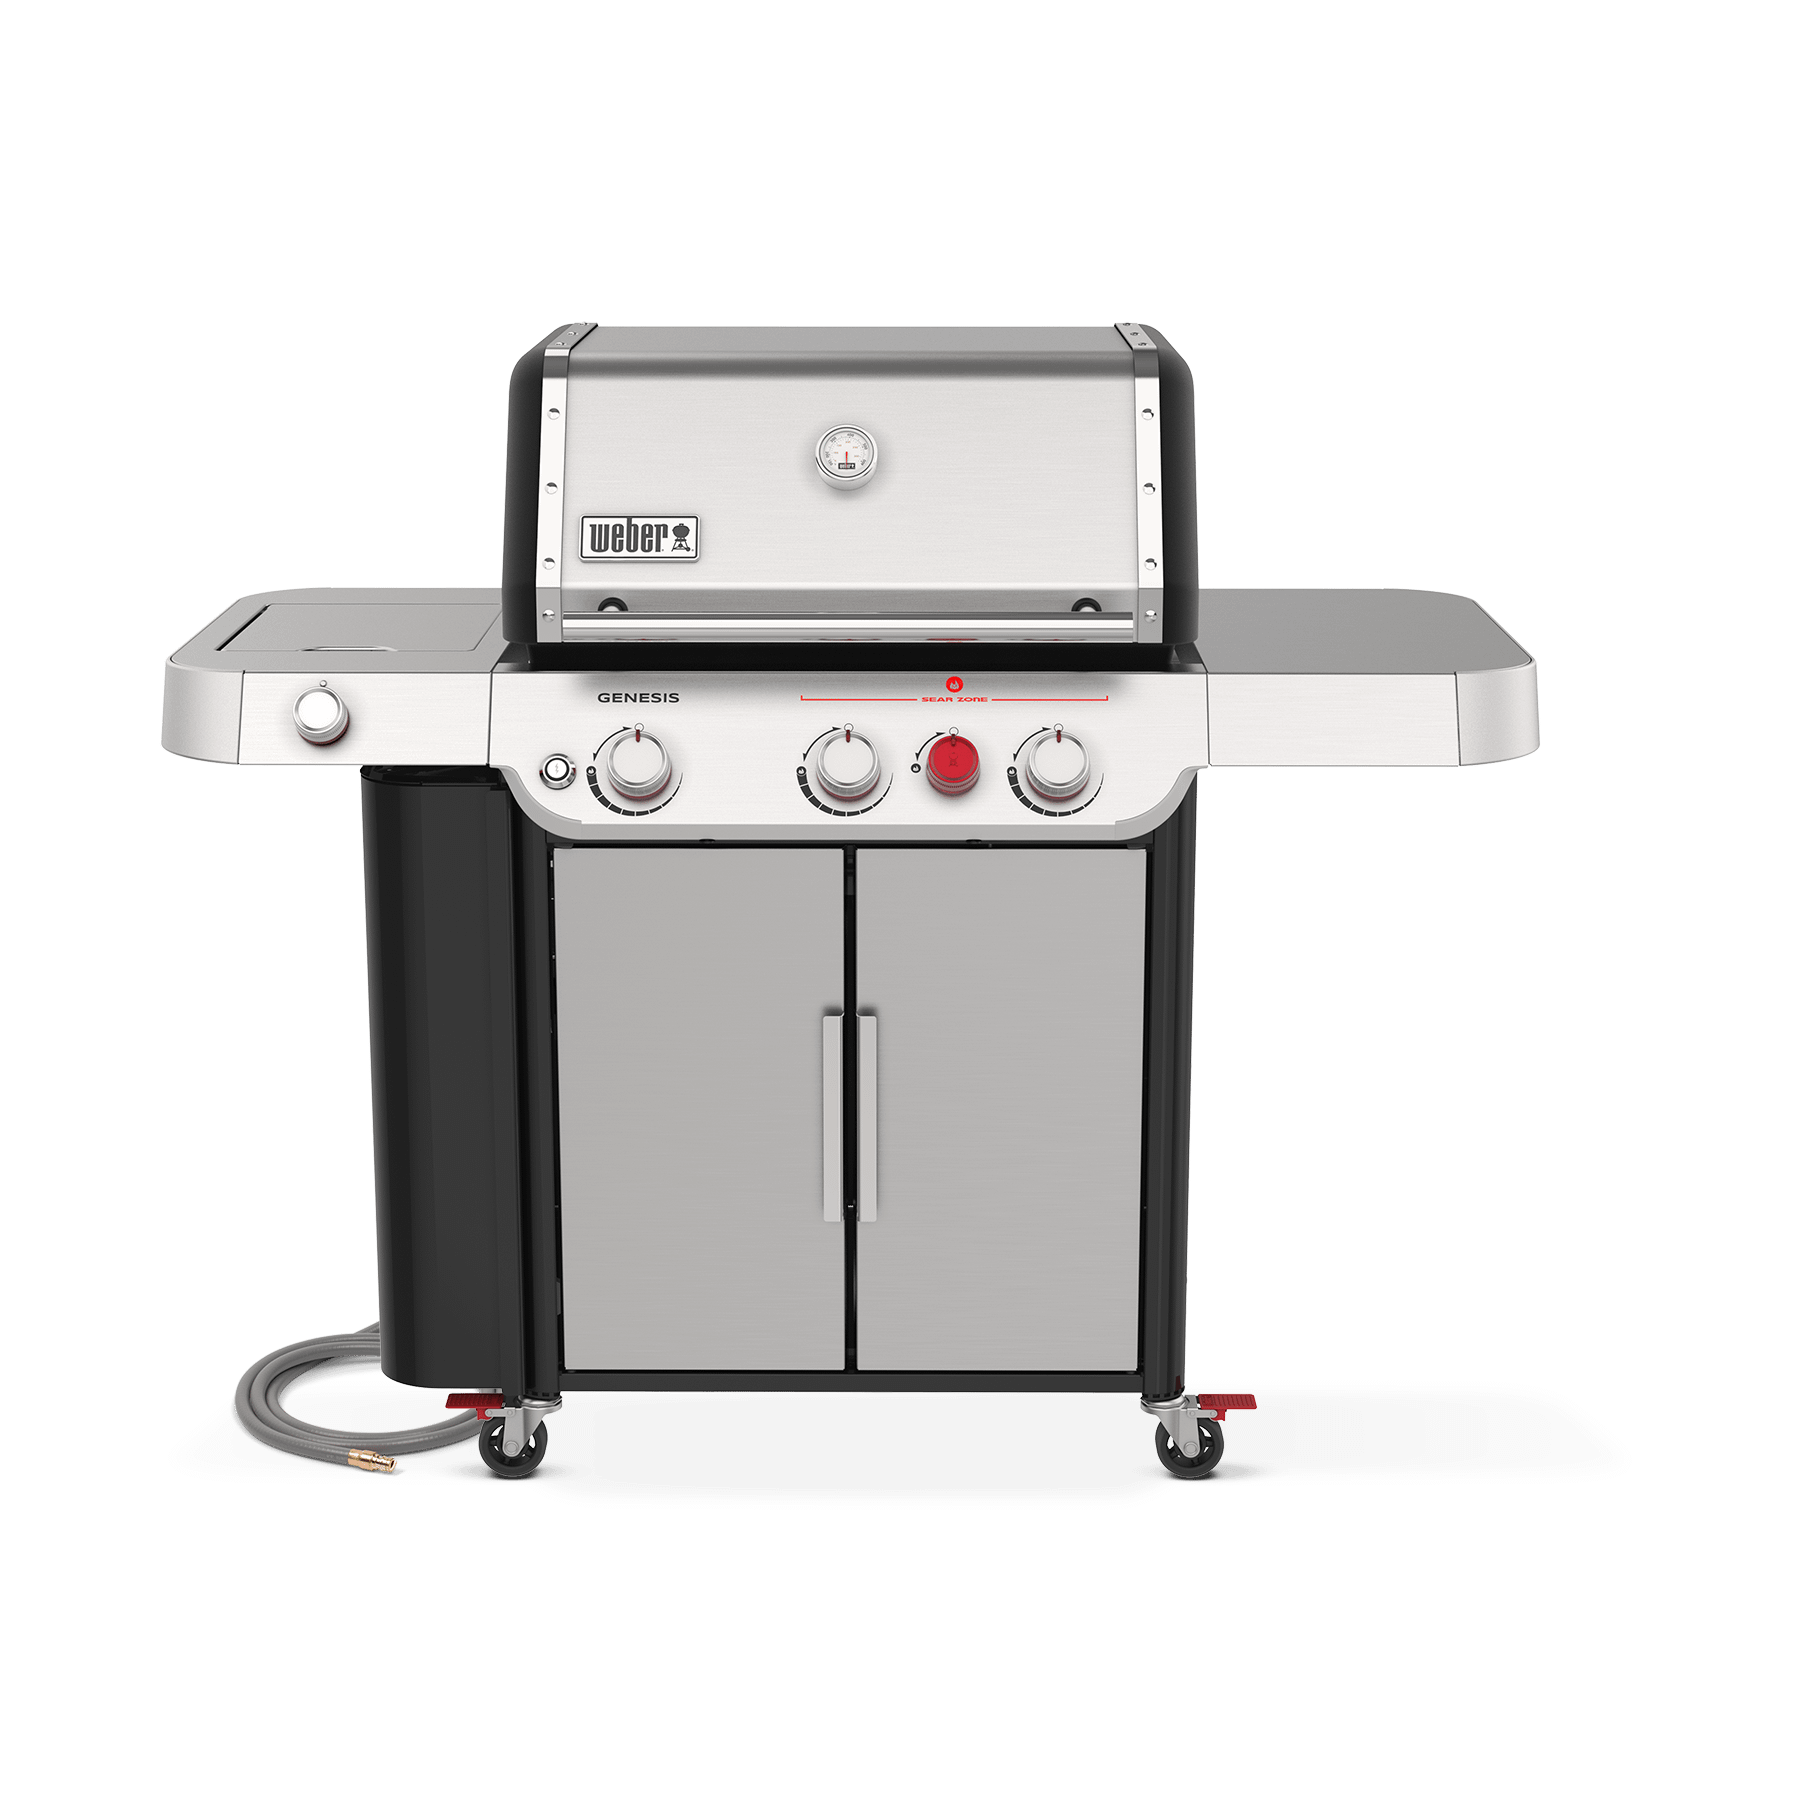 Weber 1500538 Genesis S-335 Gas Grill (Natural Gas) - Stainless Steel